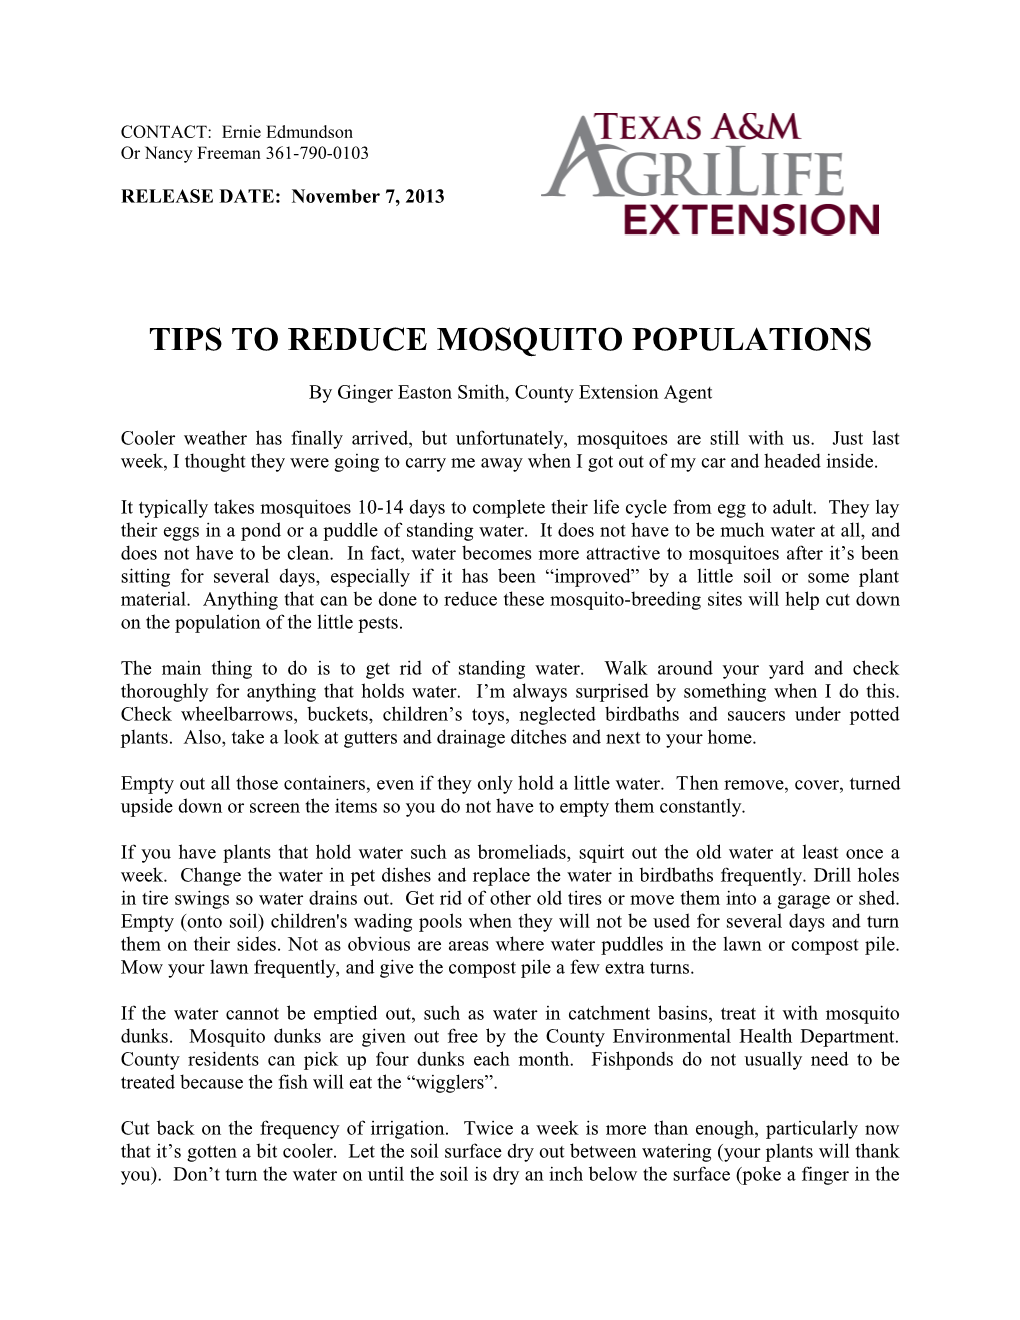 Tips to Reduce Mosquito Populations